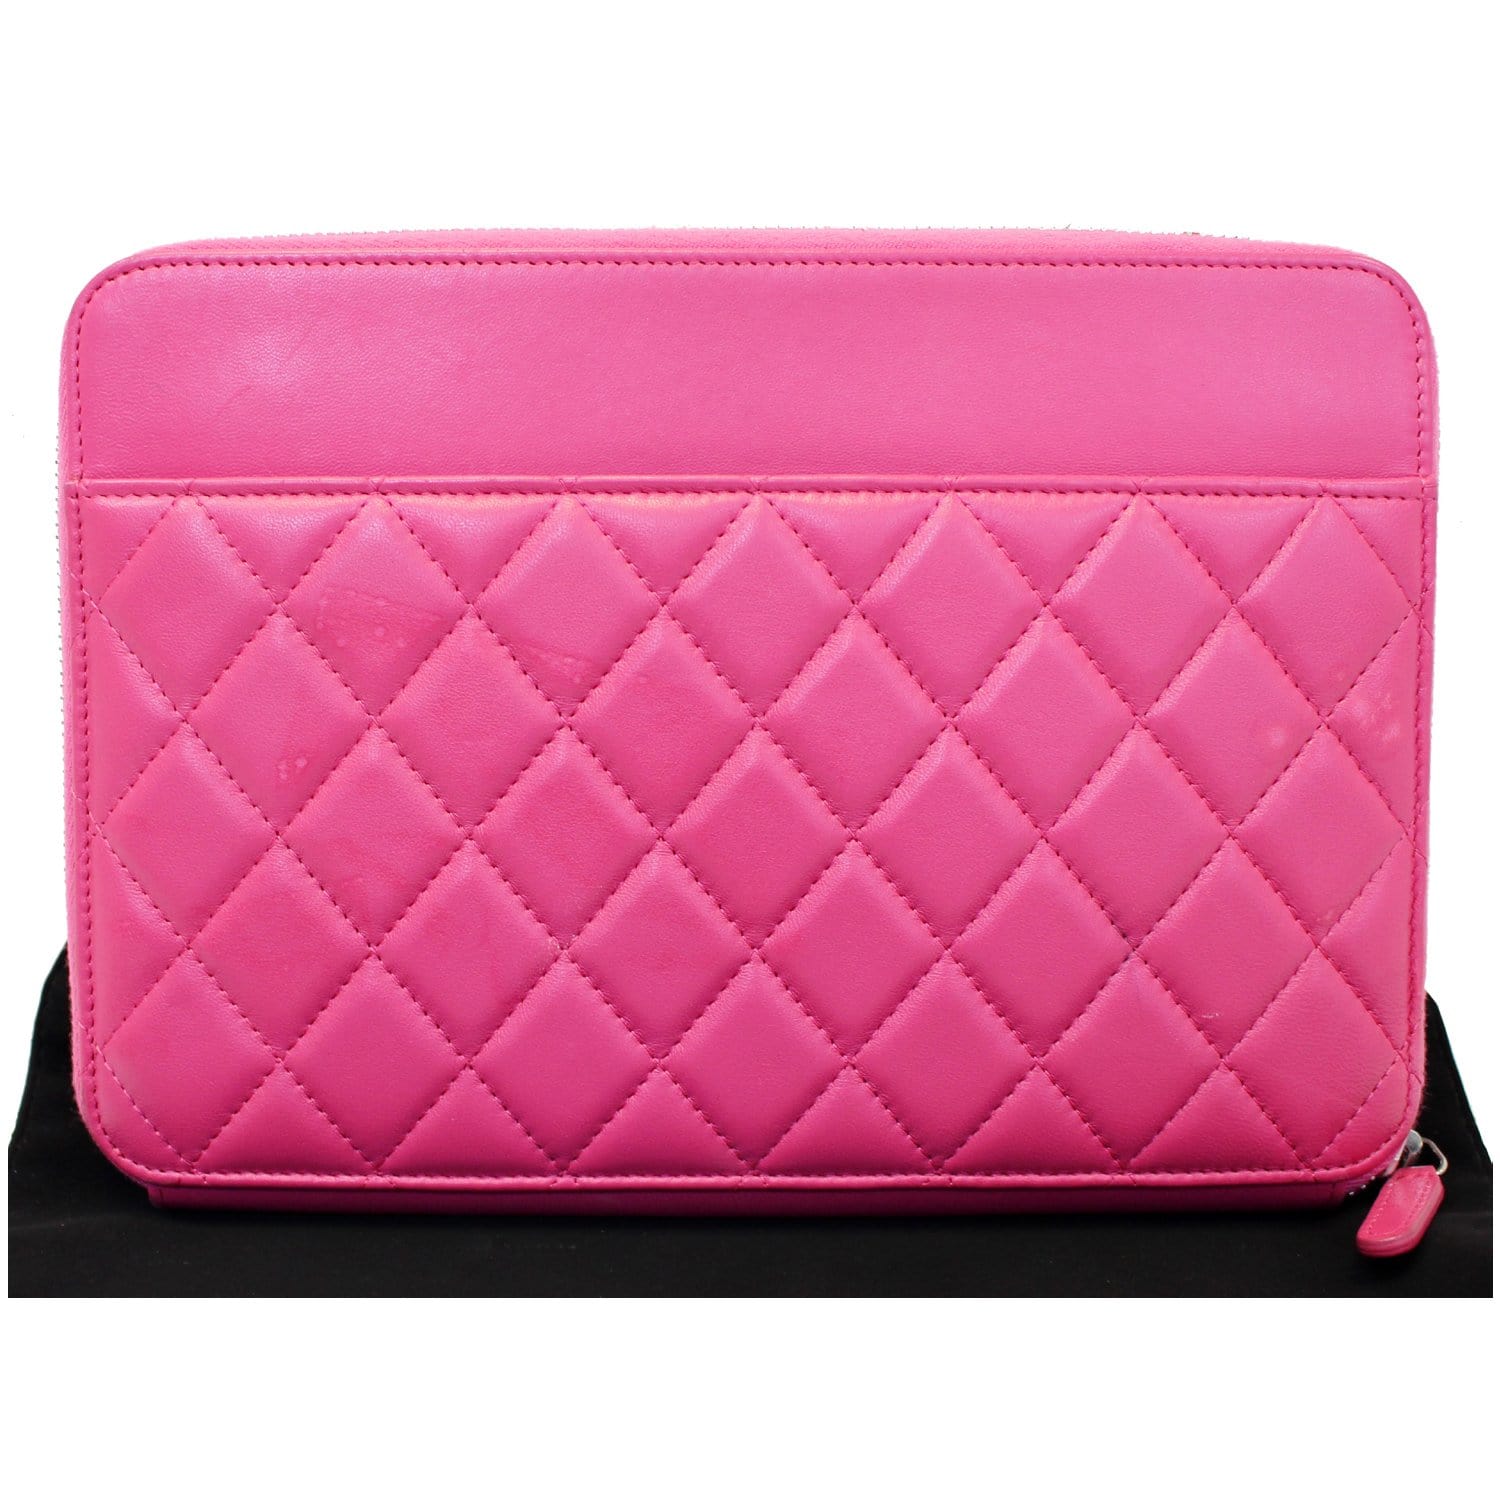 Chanel Pre-owned Women's Leather Wallet - Pink - One Size